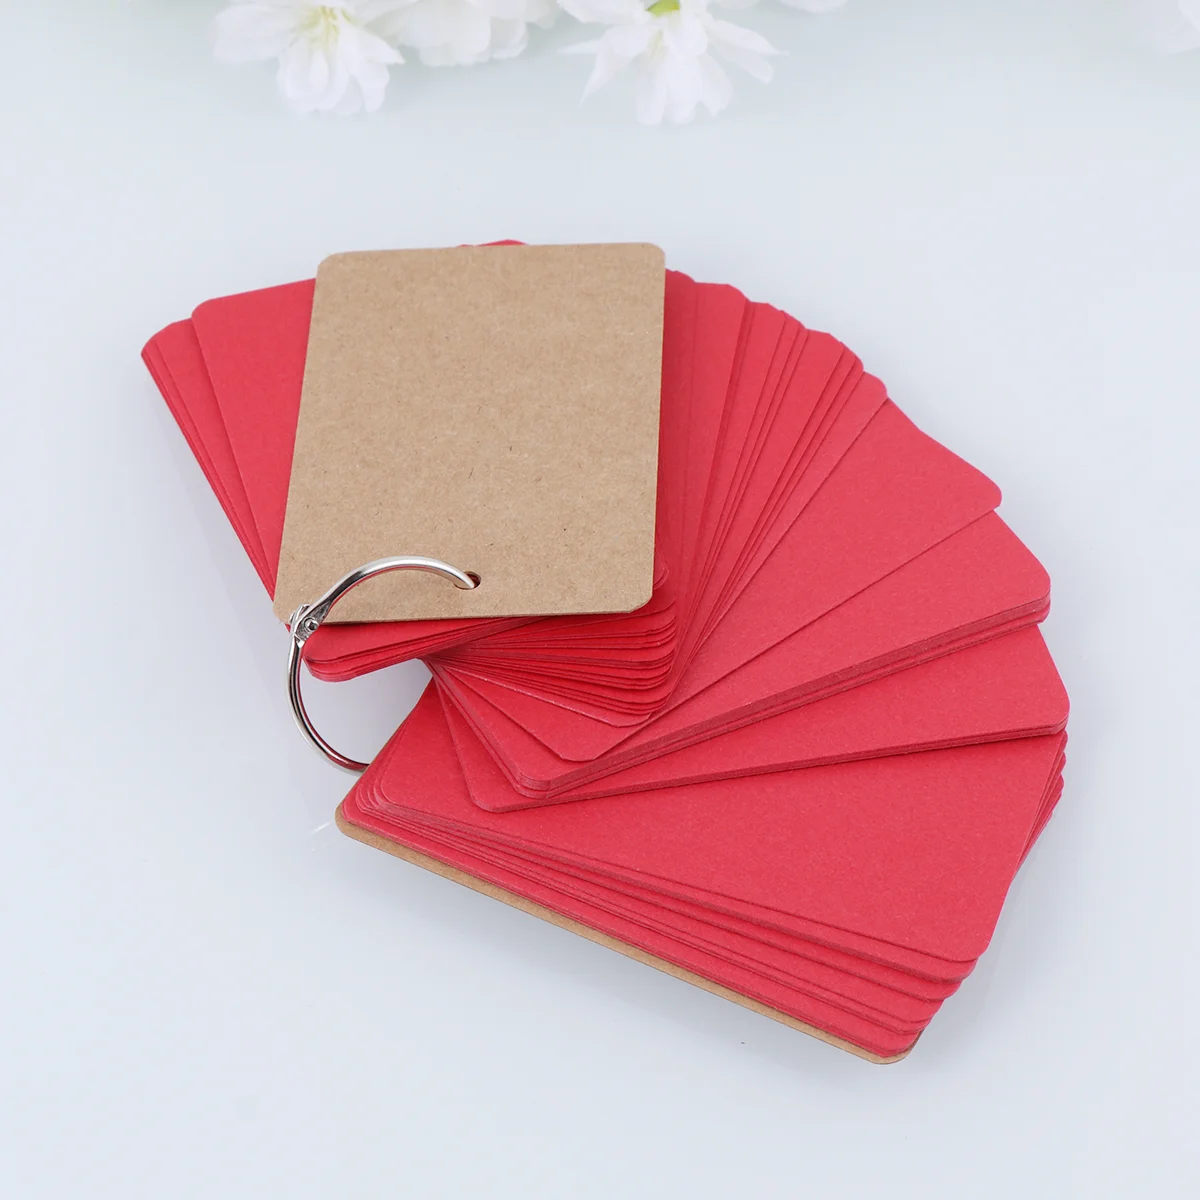 

3Pcs Notepads, Blank Spiral Notepads Small Pocket Notebooks Blank Study Cards Binder Flash Cards Memo Scratch Pads, 2x5 6cm, Red